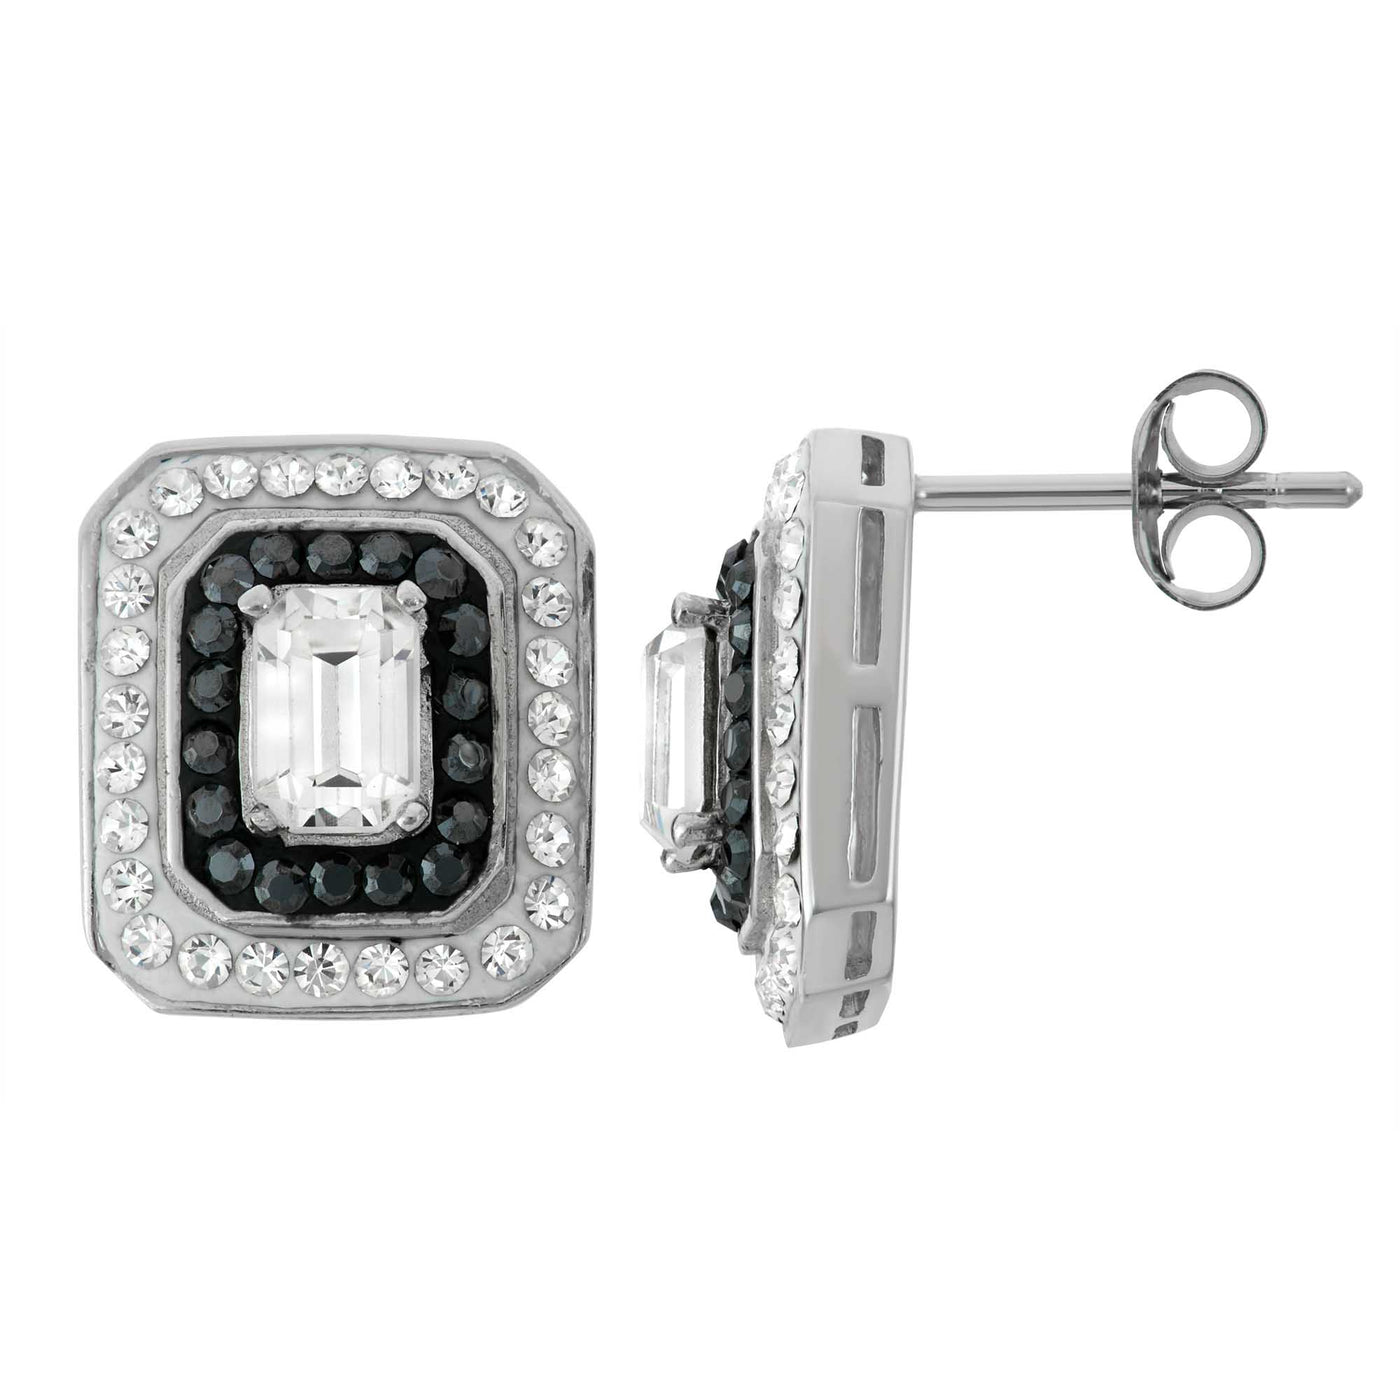 Sterling Silver Square Earring With Jet Hematite And Clear Crystal Elements